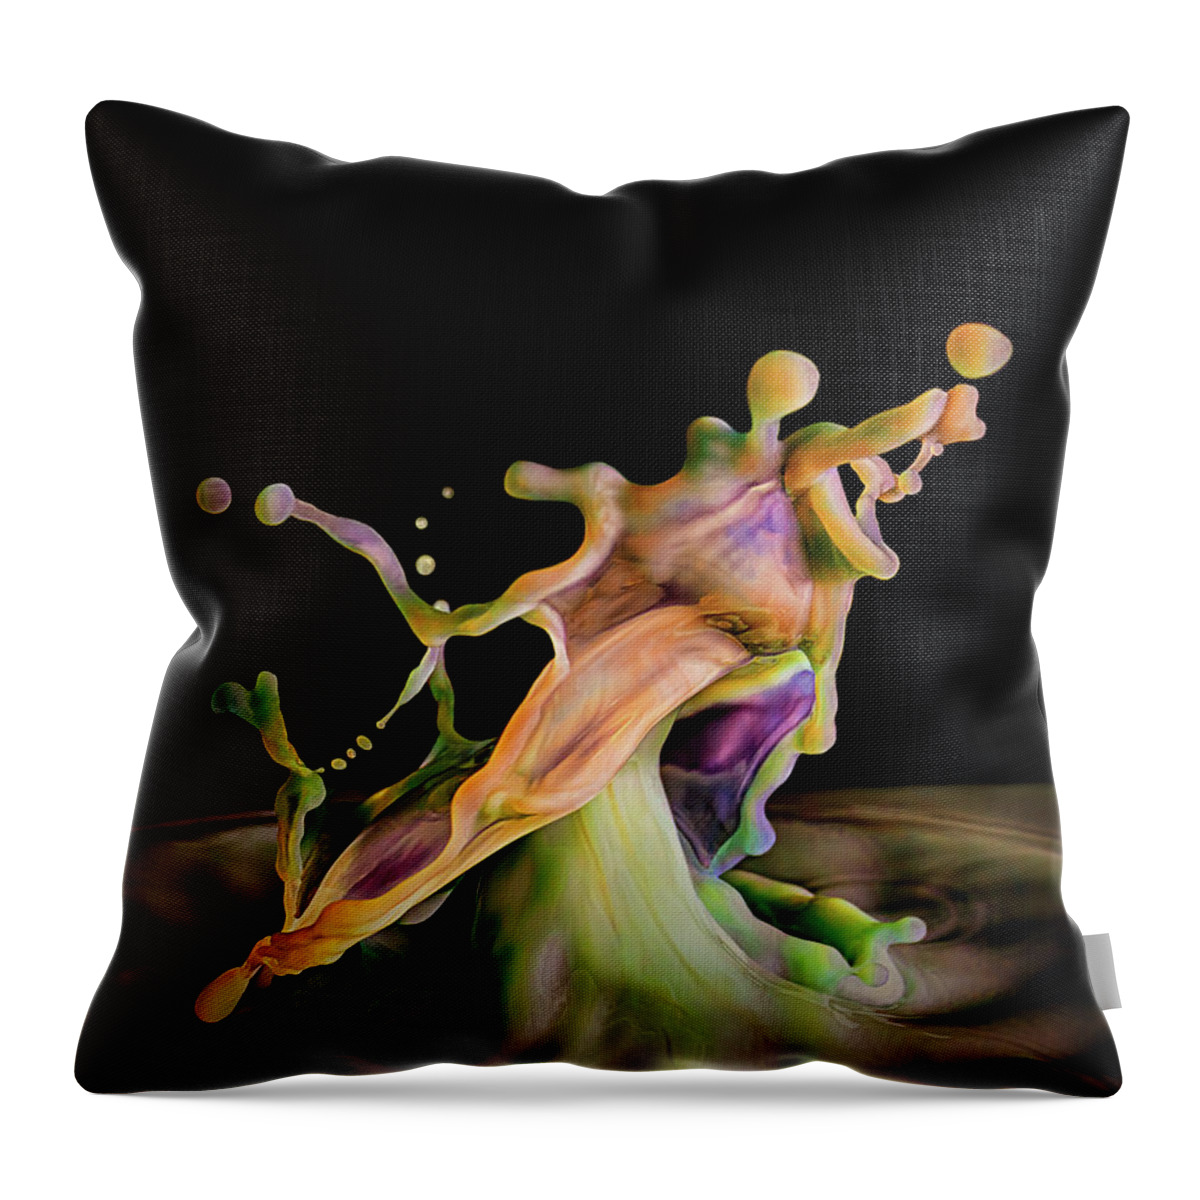 Photograph Throw Pillow featuring the photograph Prometheus by Michael McKenney